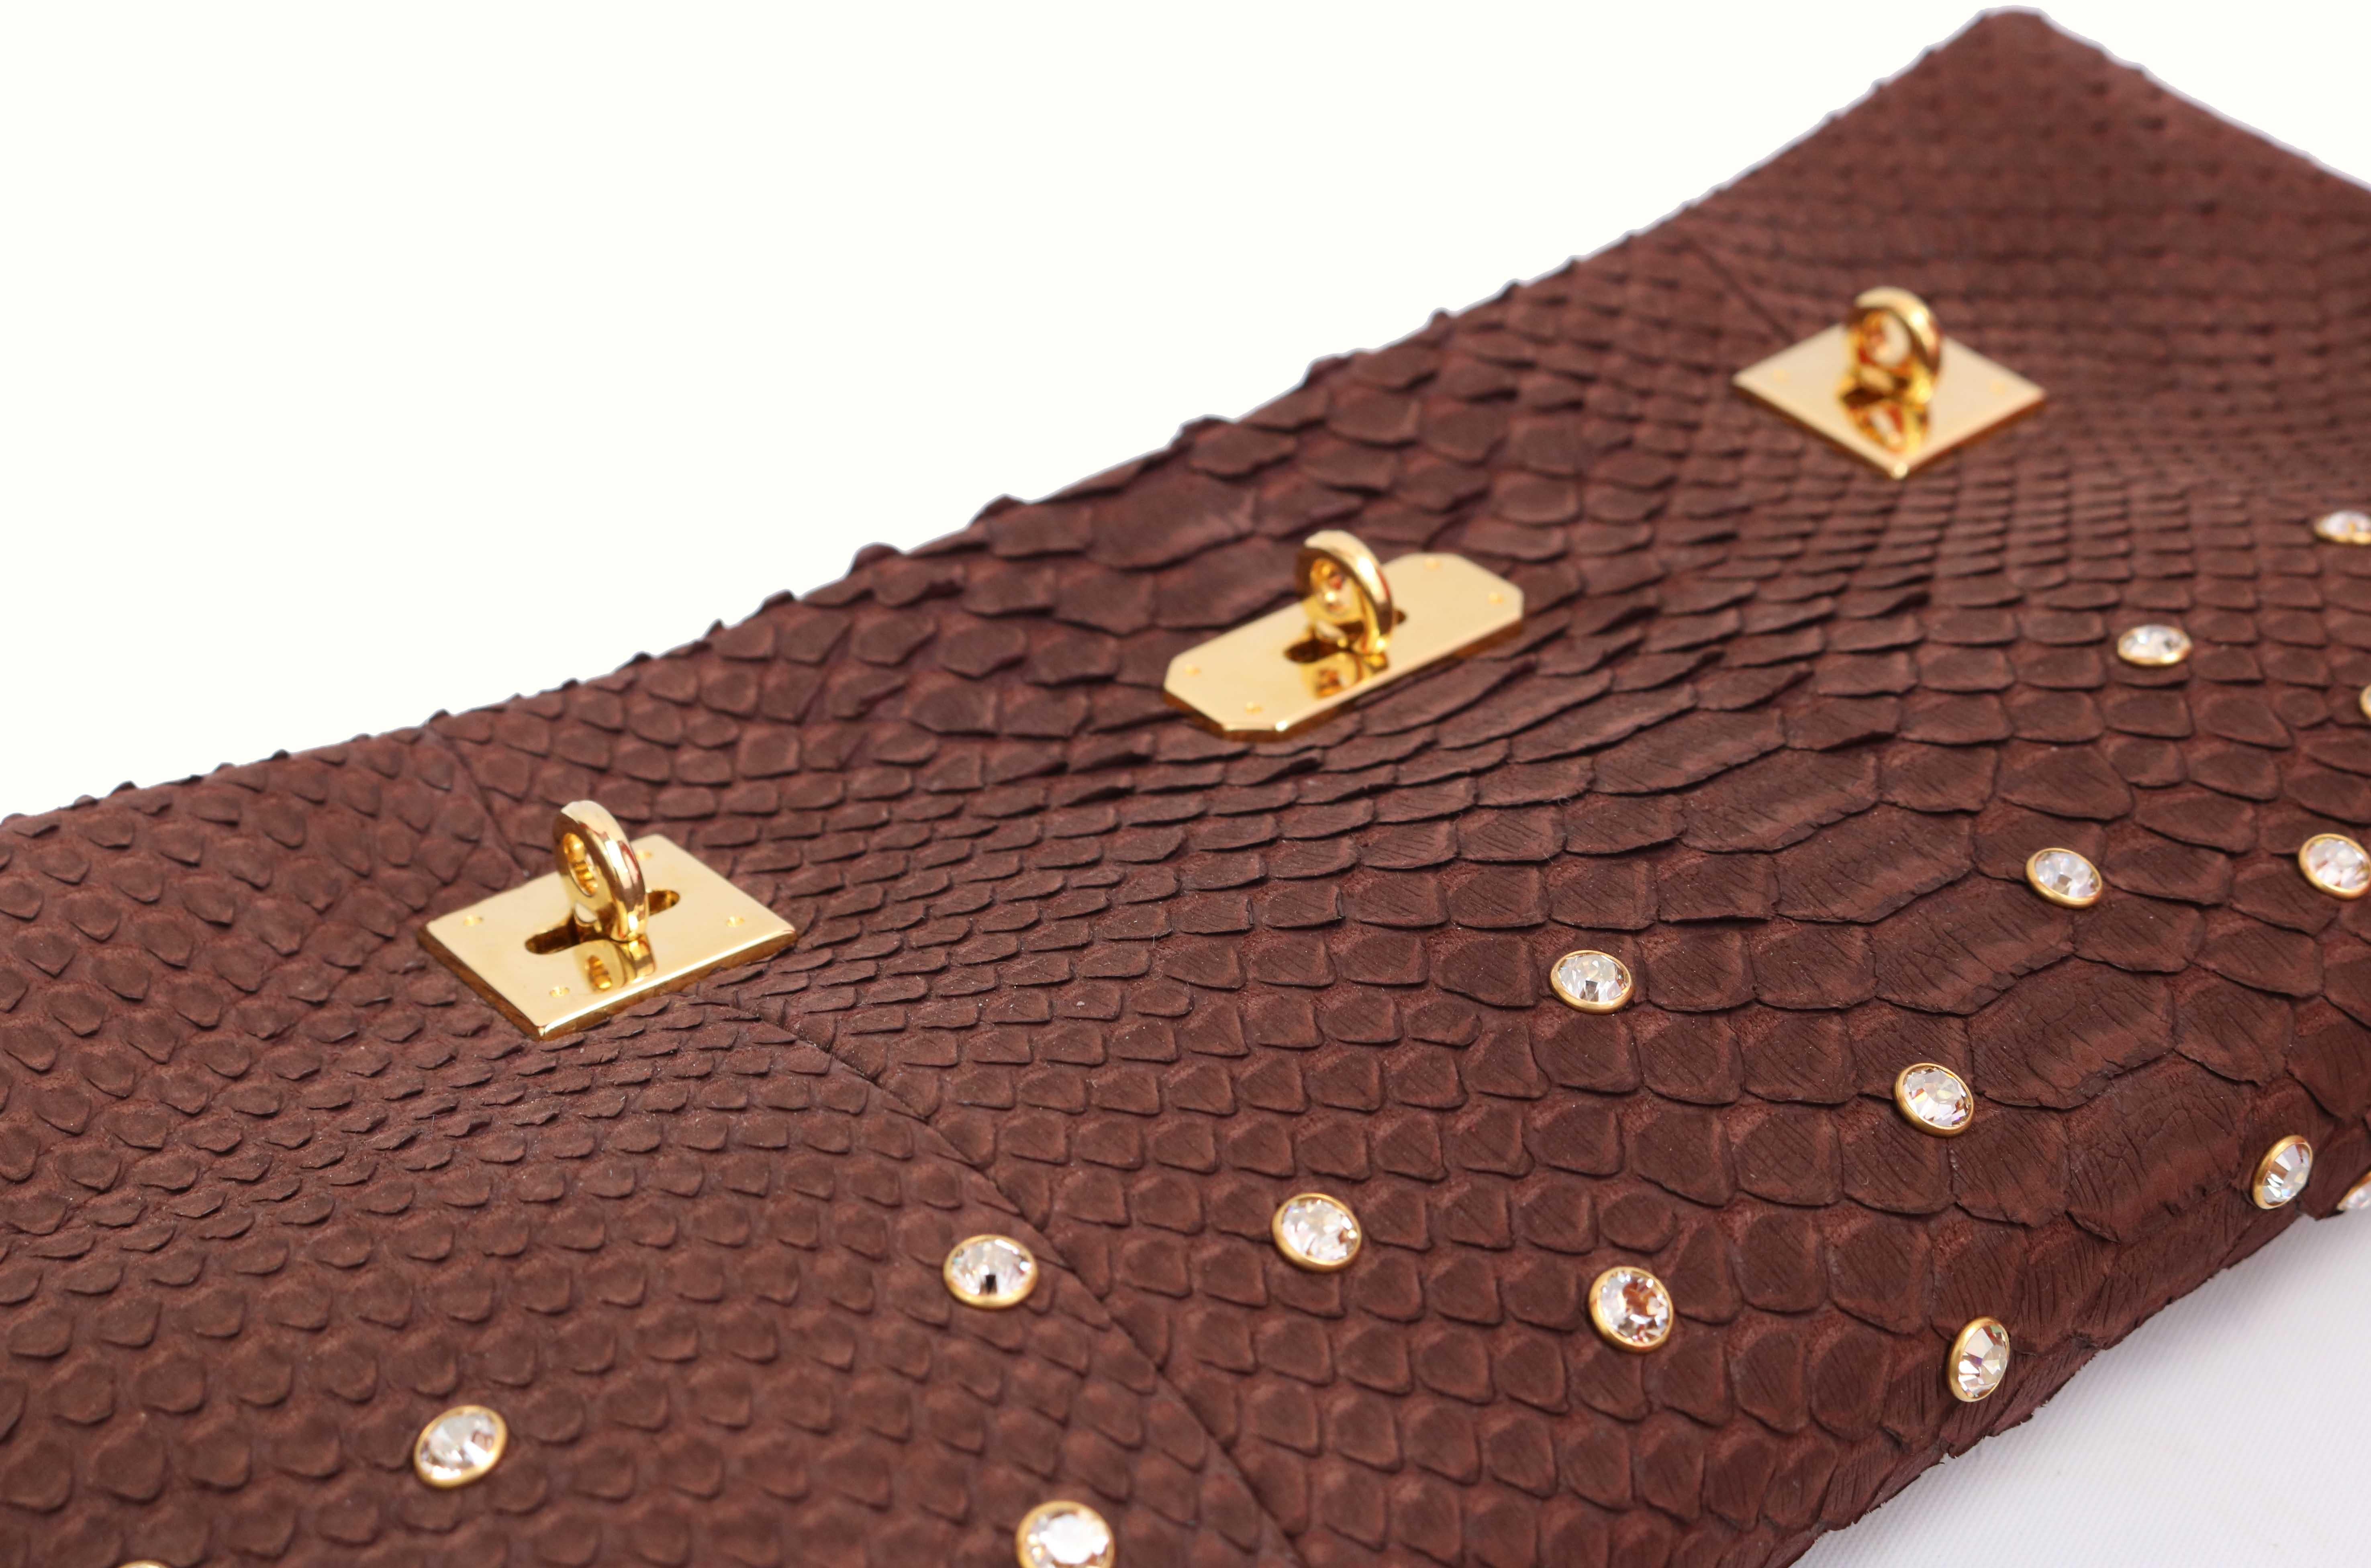 V.B.H. Brown Python Clutch with dust bag in pristine condition. 

V.B.H. is an Italian luxury accessories house, the core of which is a line of men's and women's luxury leather bags along with a collection of fine jewelry and decorative home